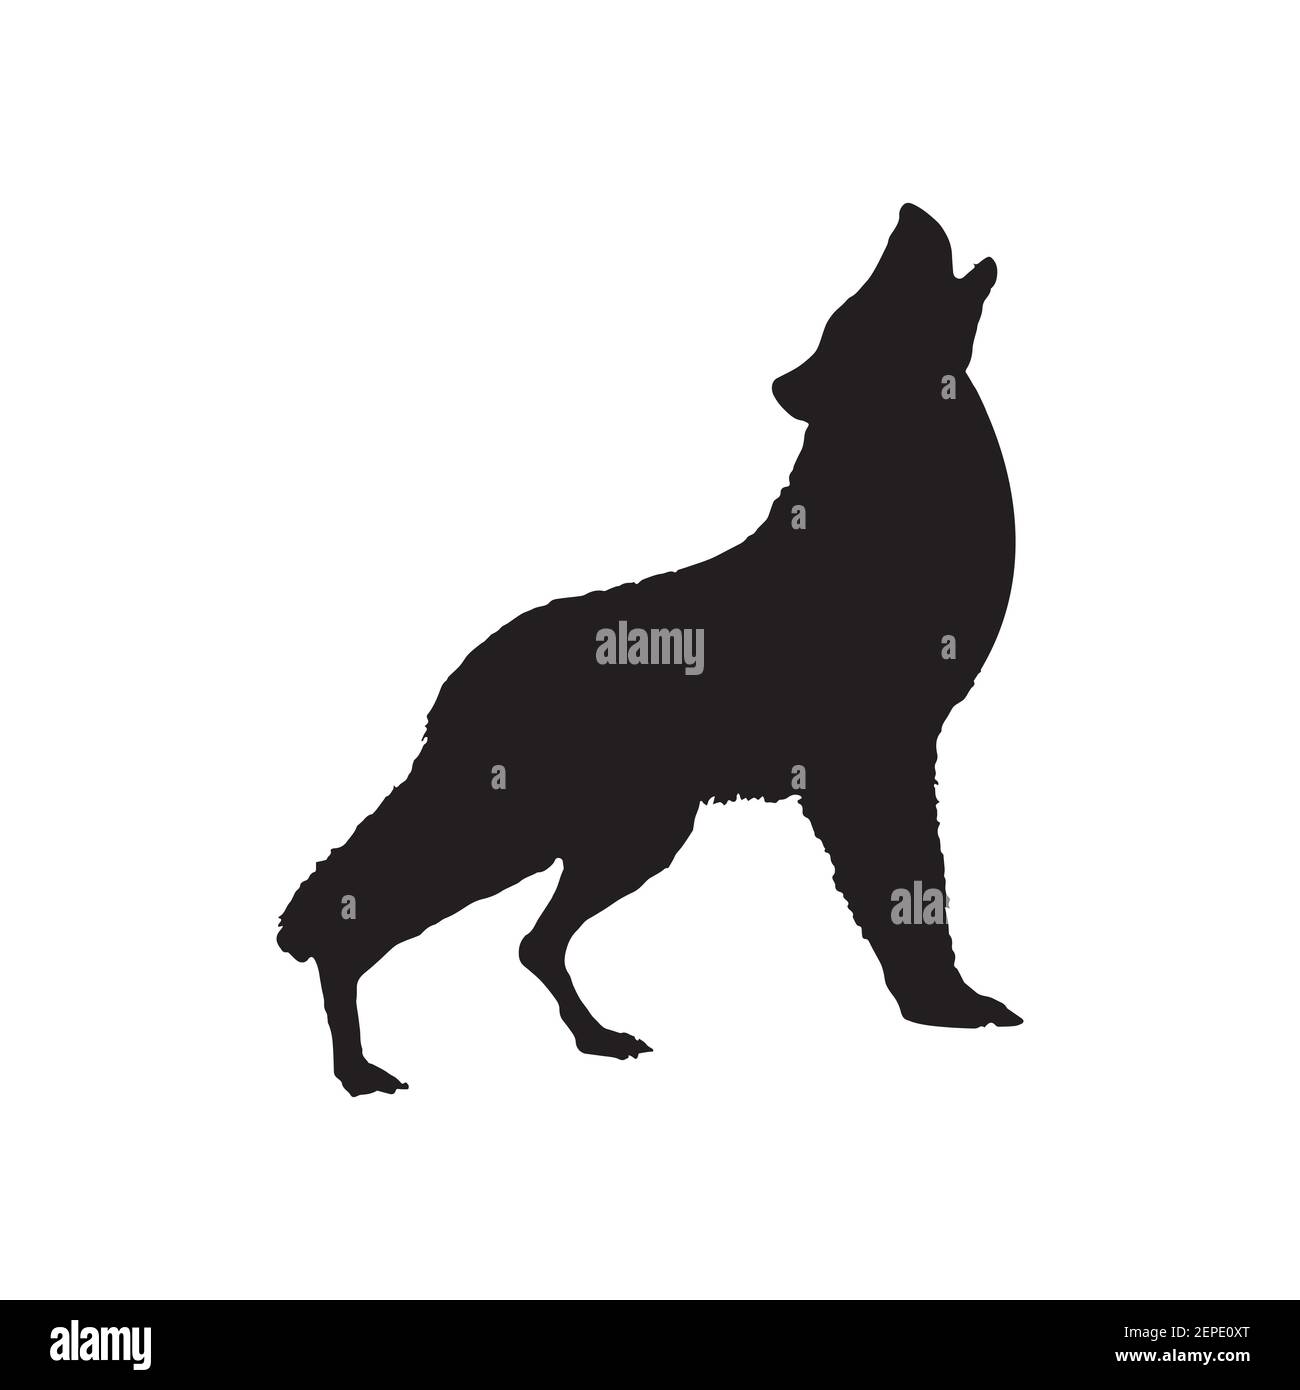 Vector isolated illustration. Flat black simplified profile silhouette of fox standing on all legs. Stock Vector